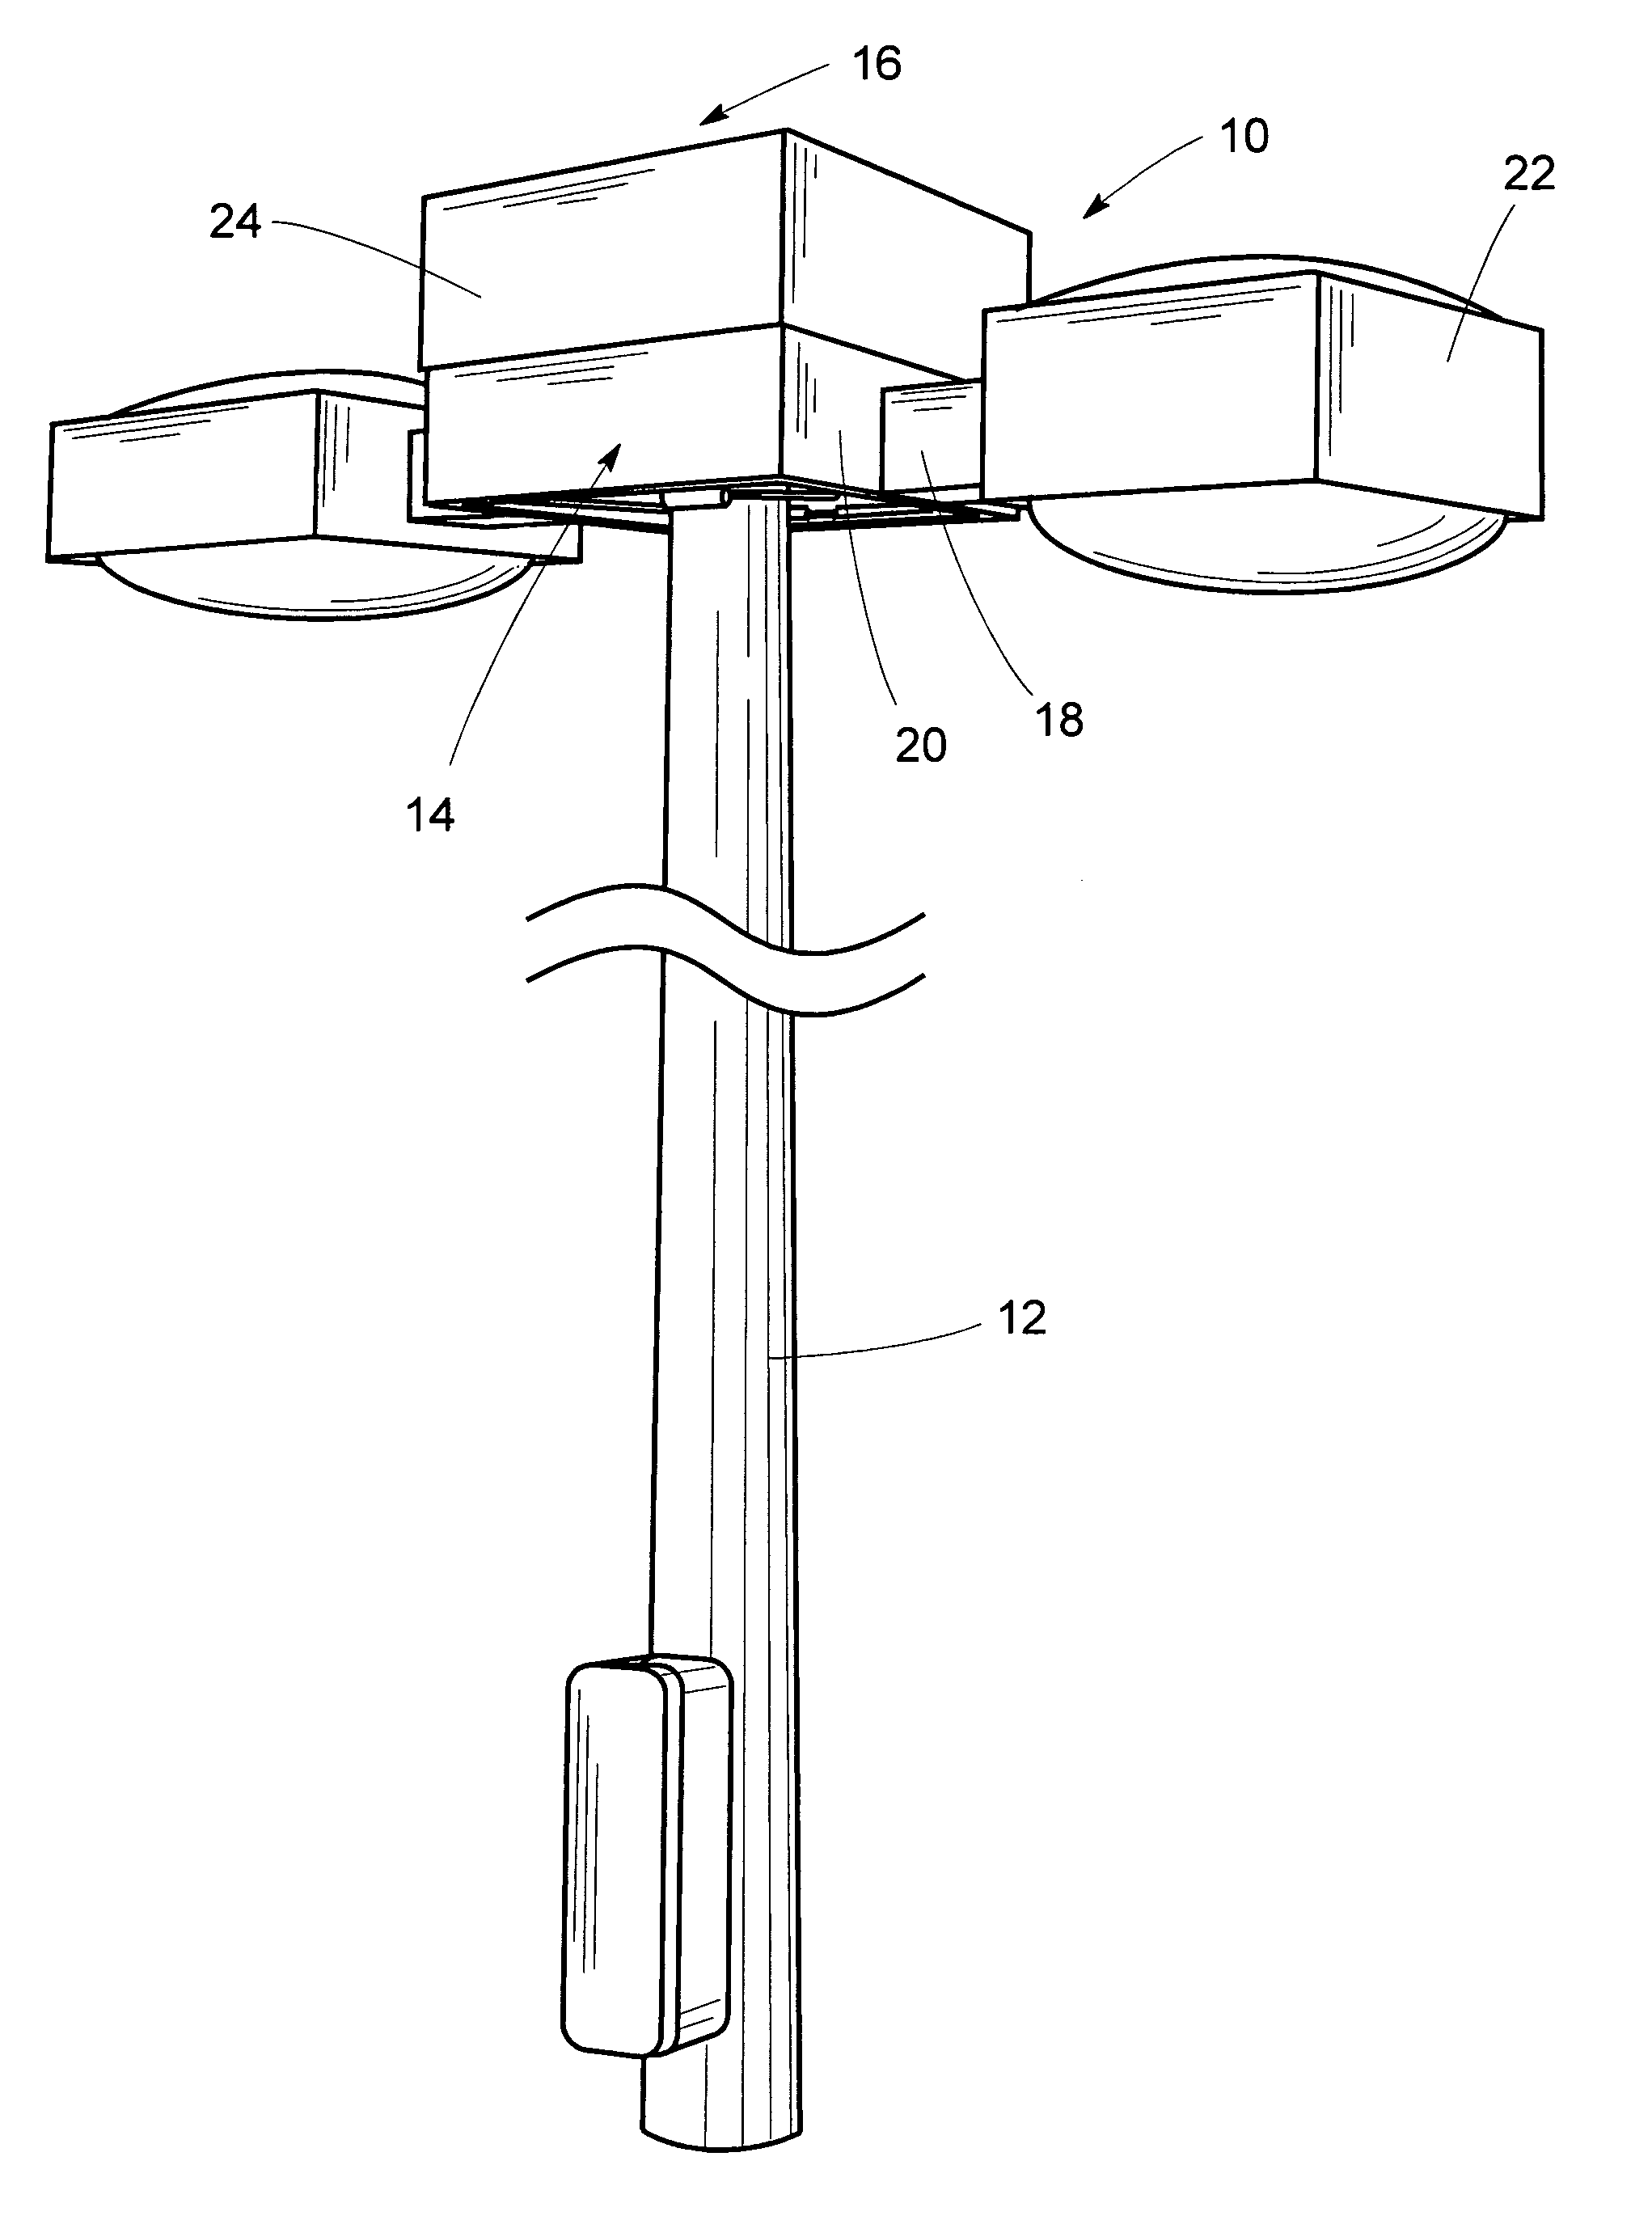 Architectural mast-mounted support system